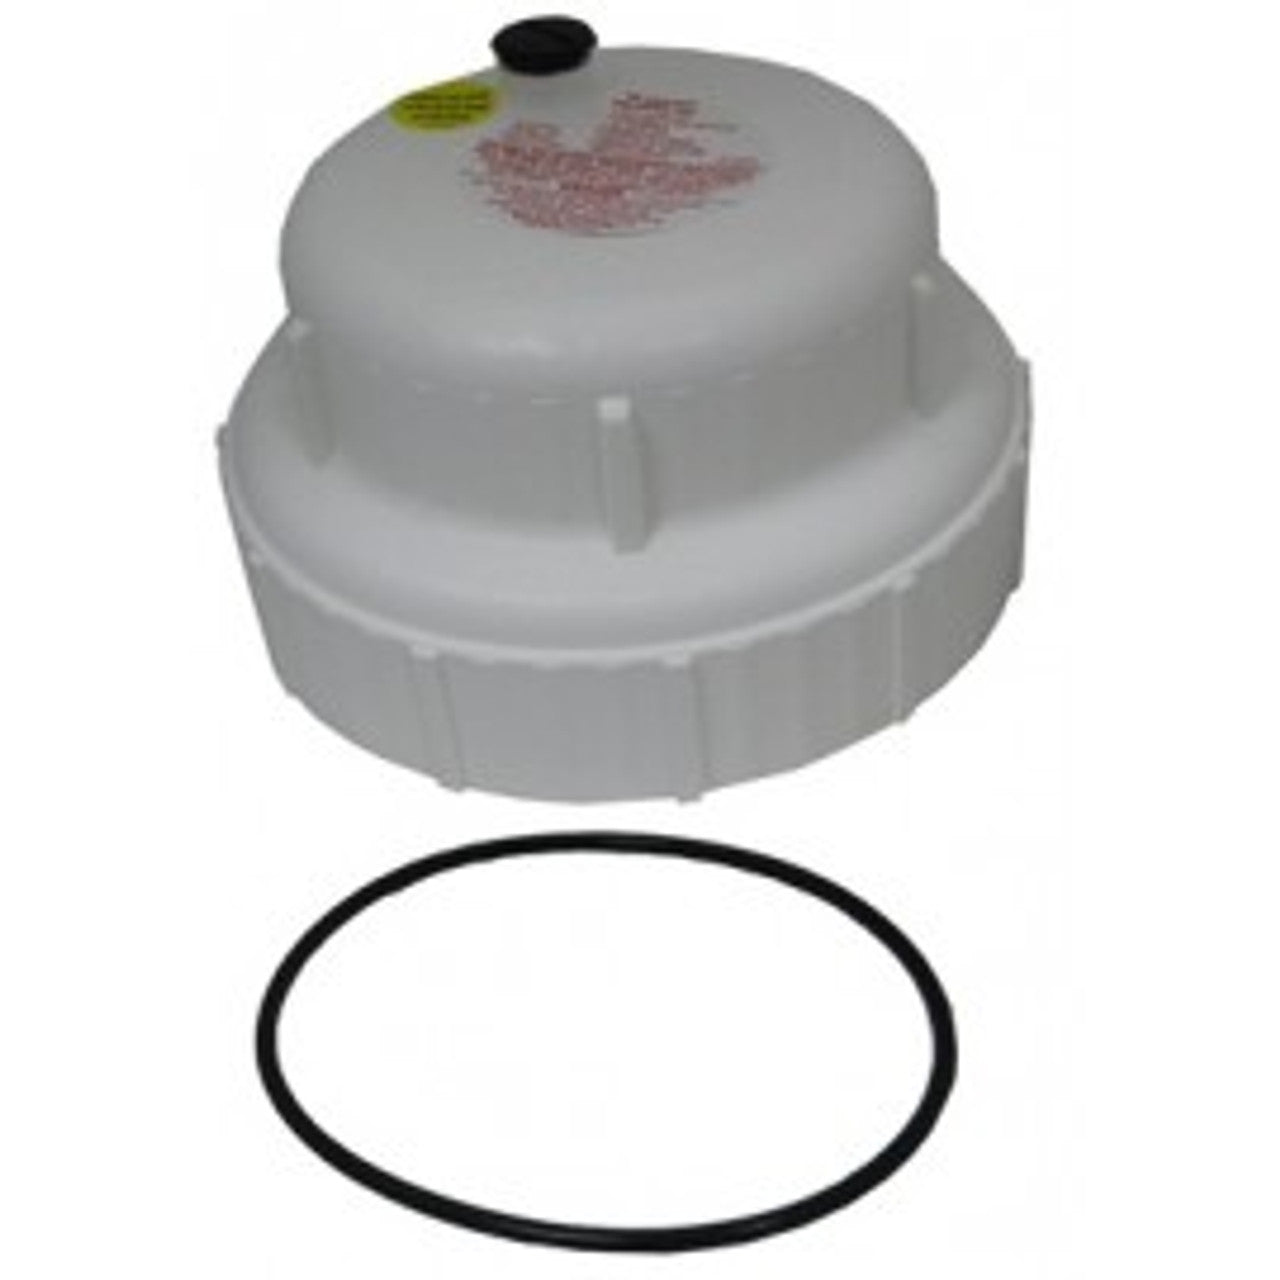 #1 King Technology Pool Frog 01-22-9417 Cap with O'ring